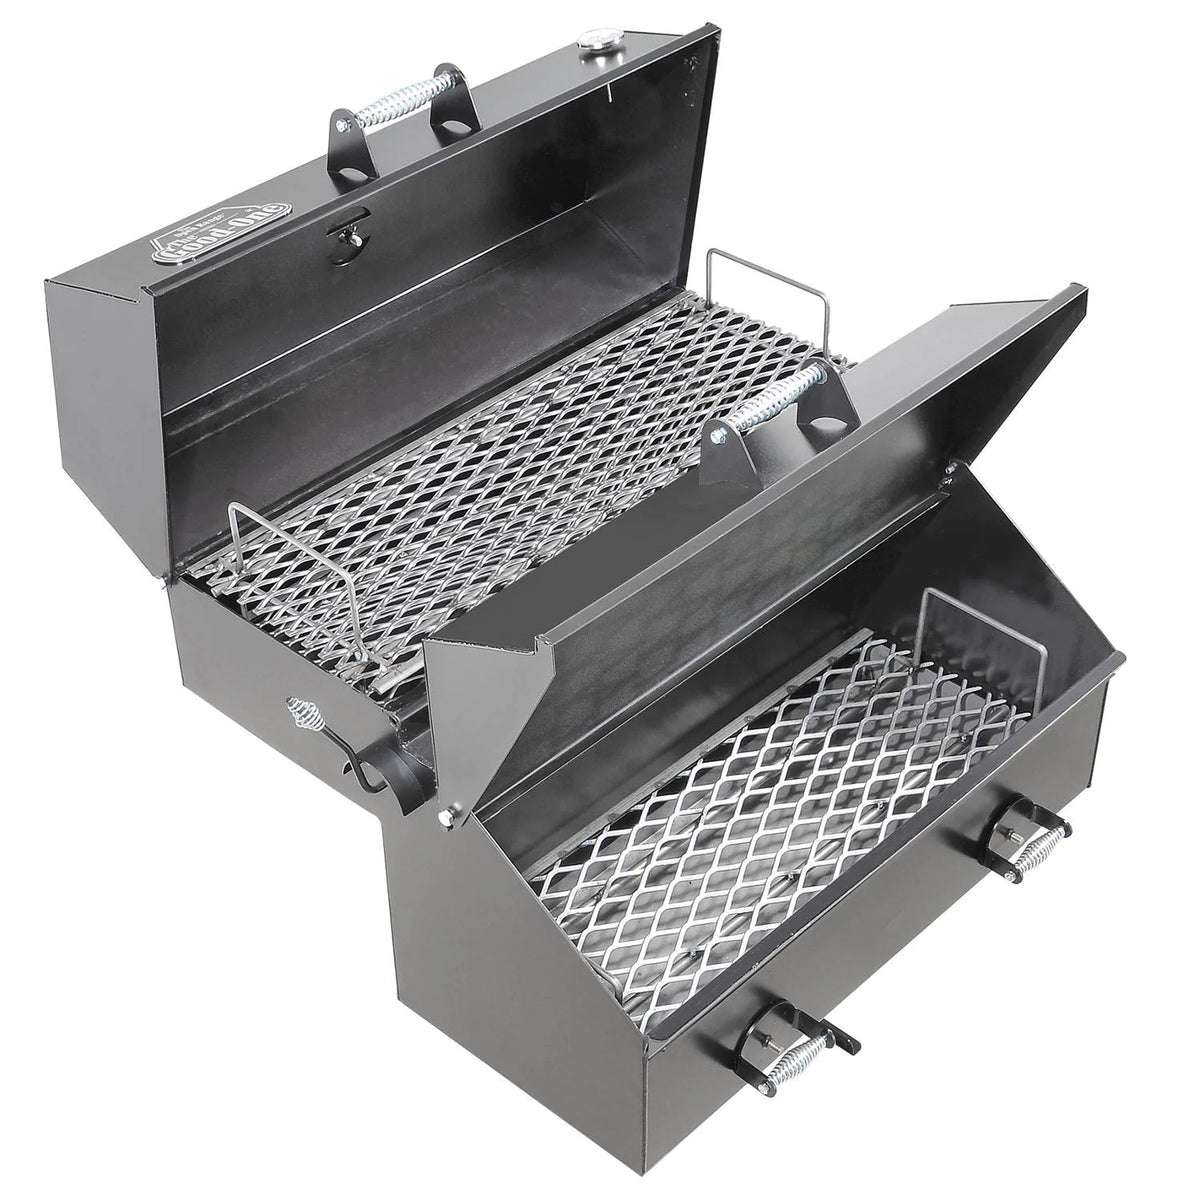 open charcoal grill